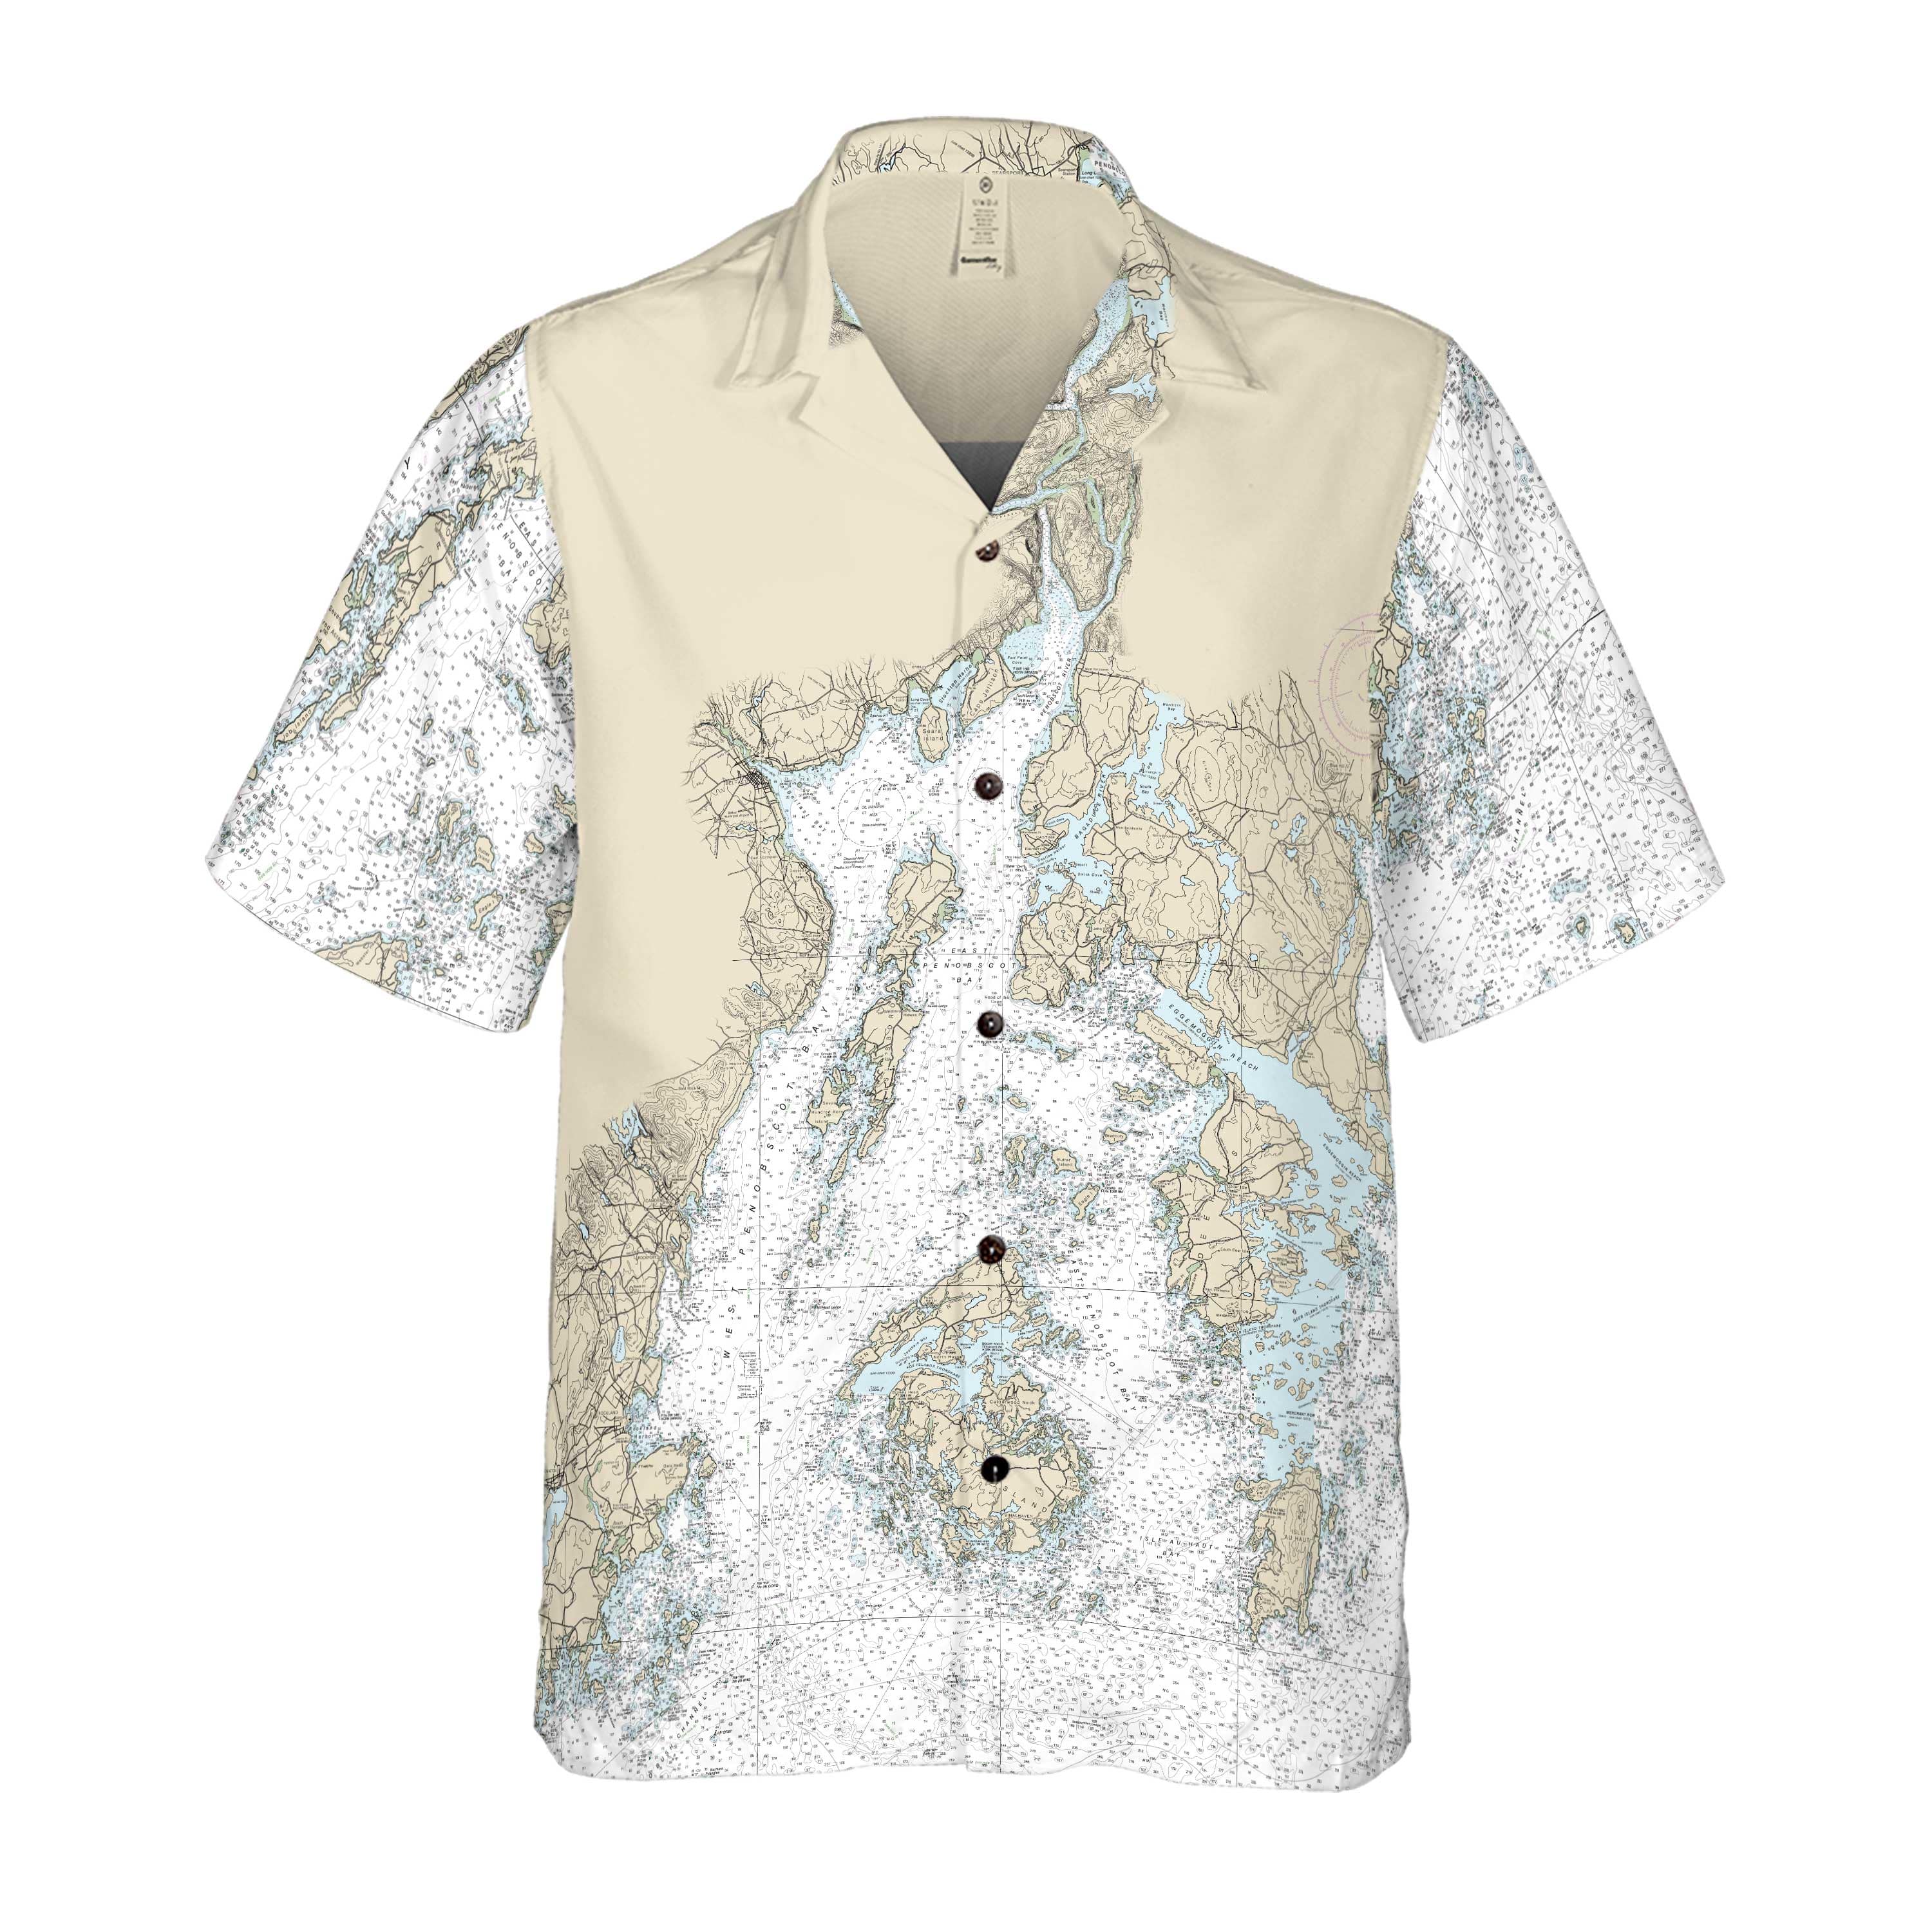 The Penobscot Bay and Bar Harbor Coconut Button Camp Shirt